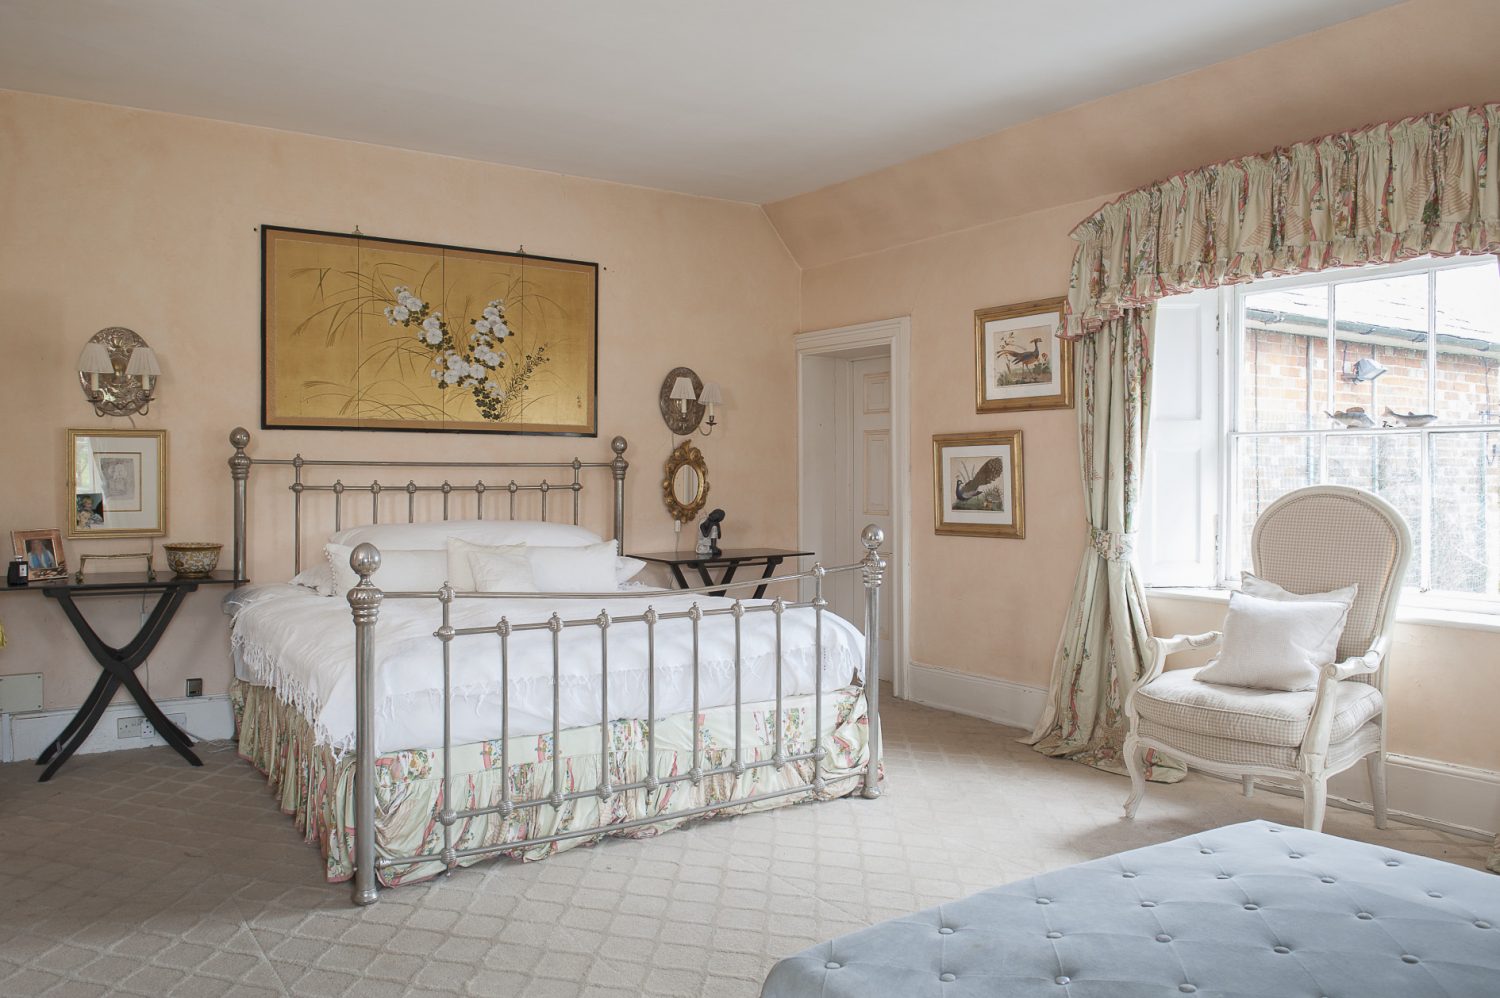 Peachy cream paintwork offsets oriental paintings of birds and flowers, while light dances off the metal bedstead and gilt light sconces. A marble fireplace at the foot of the bed framed on either side by heavy, patterned curtains, gives the room a sense of grandeur as well as softness